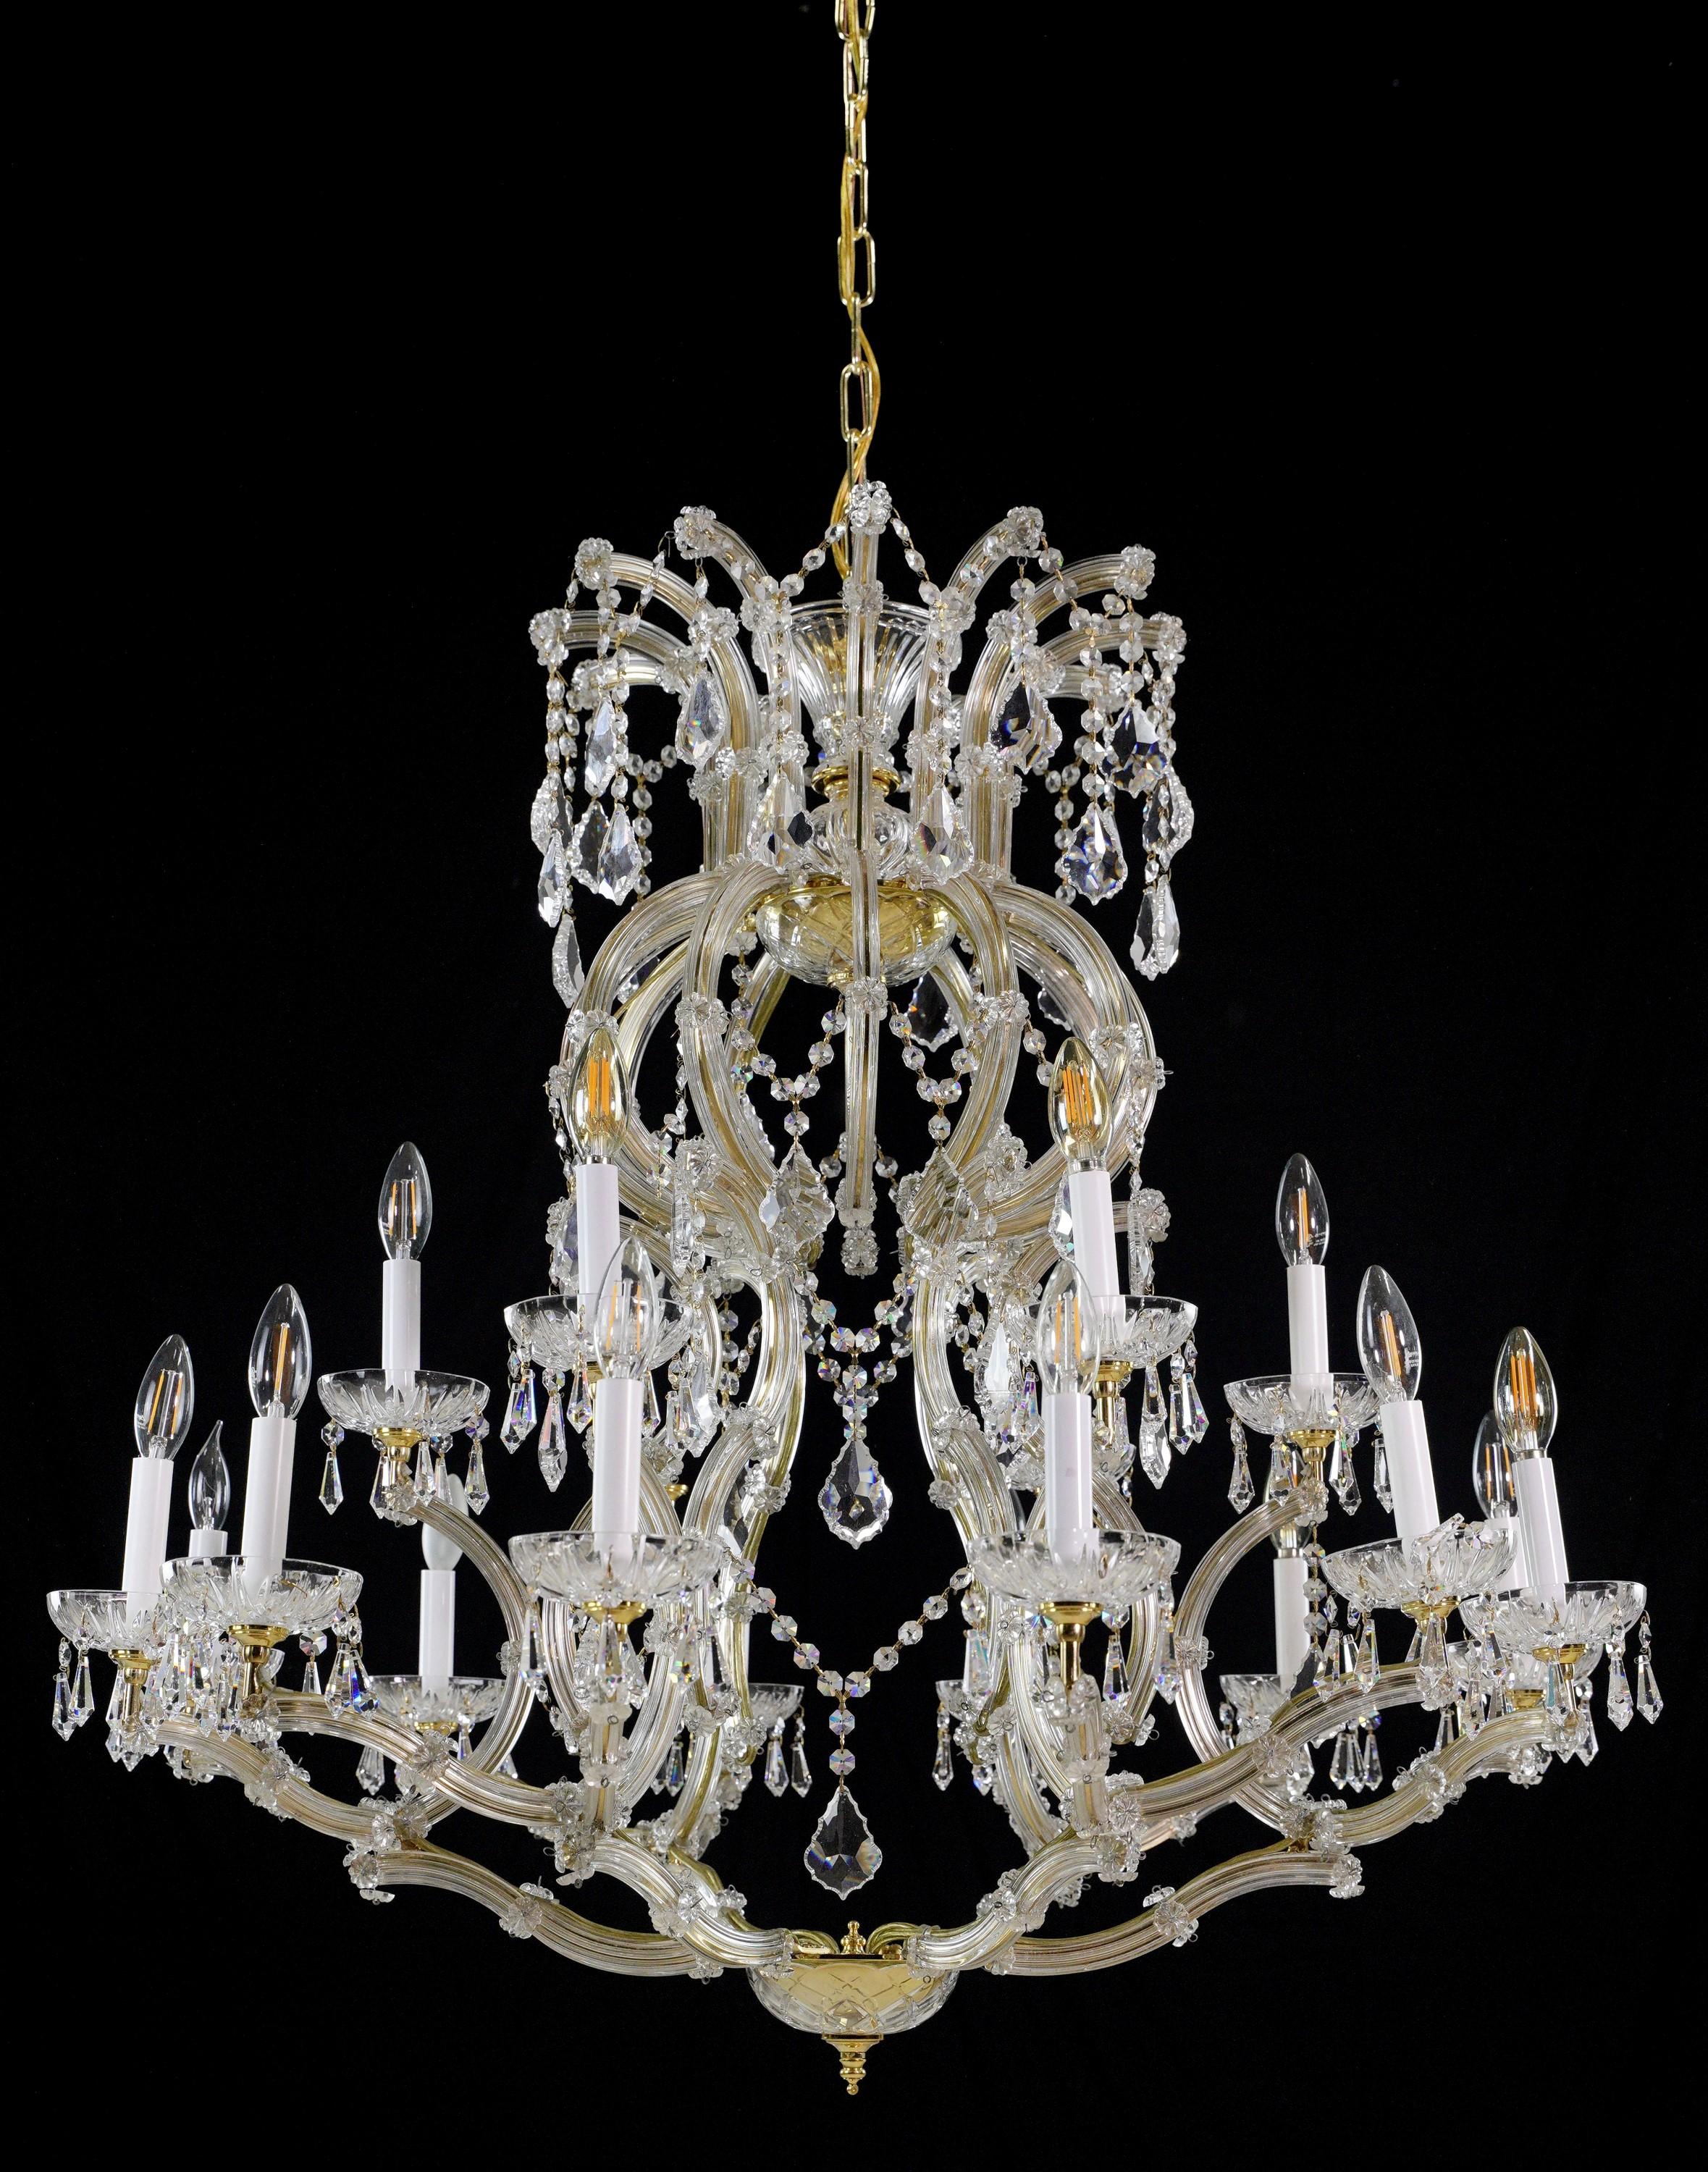 6 Arm 18 Lights Marie Therese Crystal & Brass Chandelier In Good Condition For Sale In New York, NY